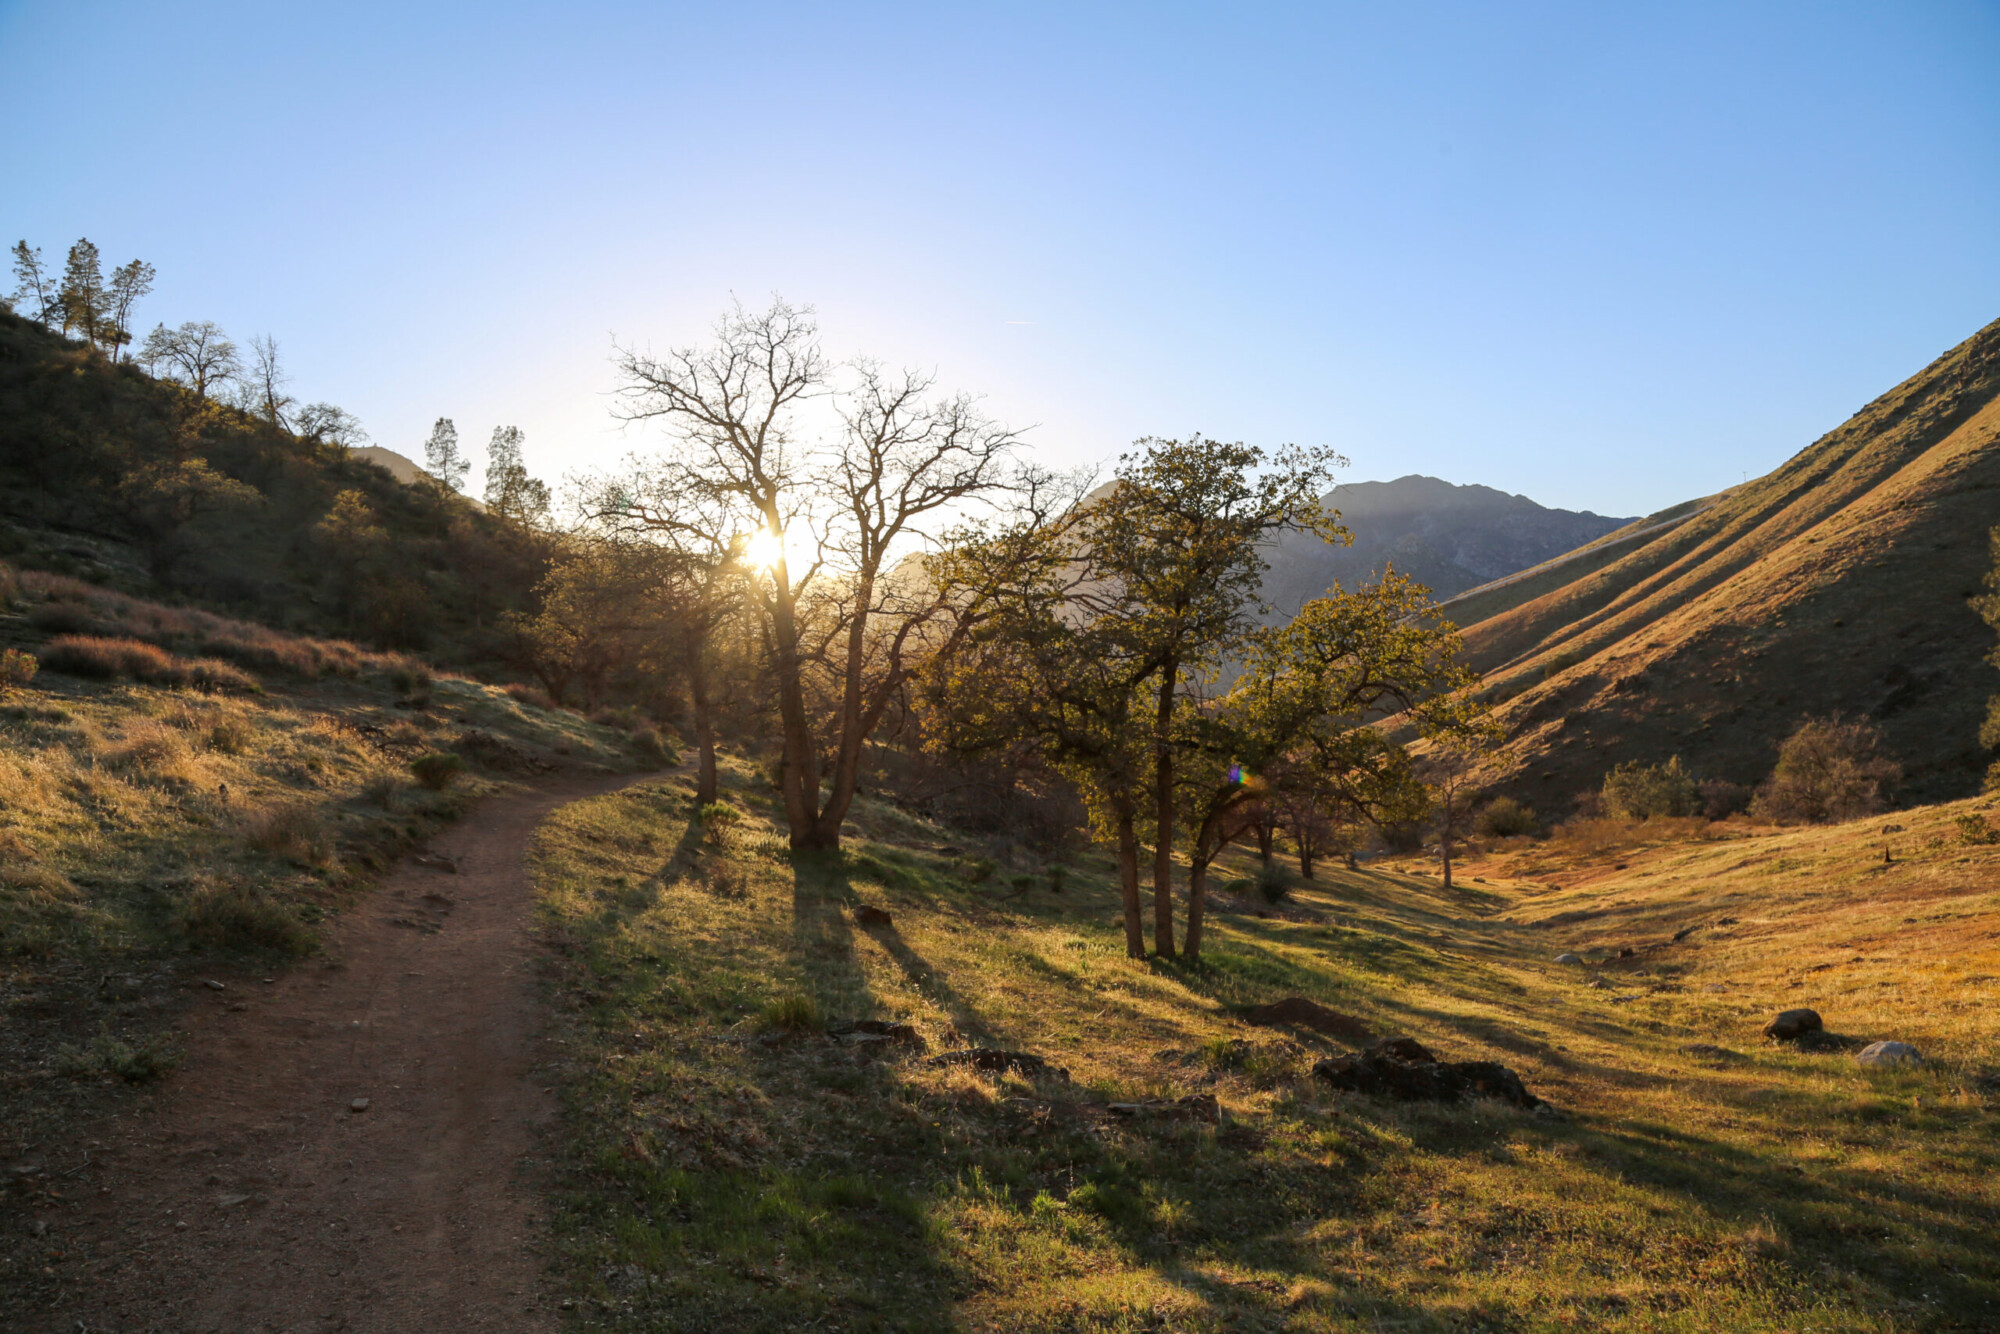 Sunset view of a small grouping of trees against the hilly landscape of Cannel Meadow Trail in Kernville, California.